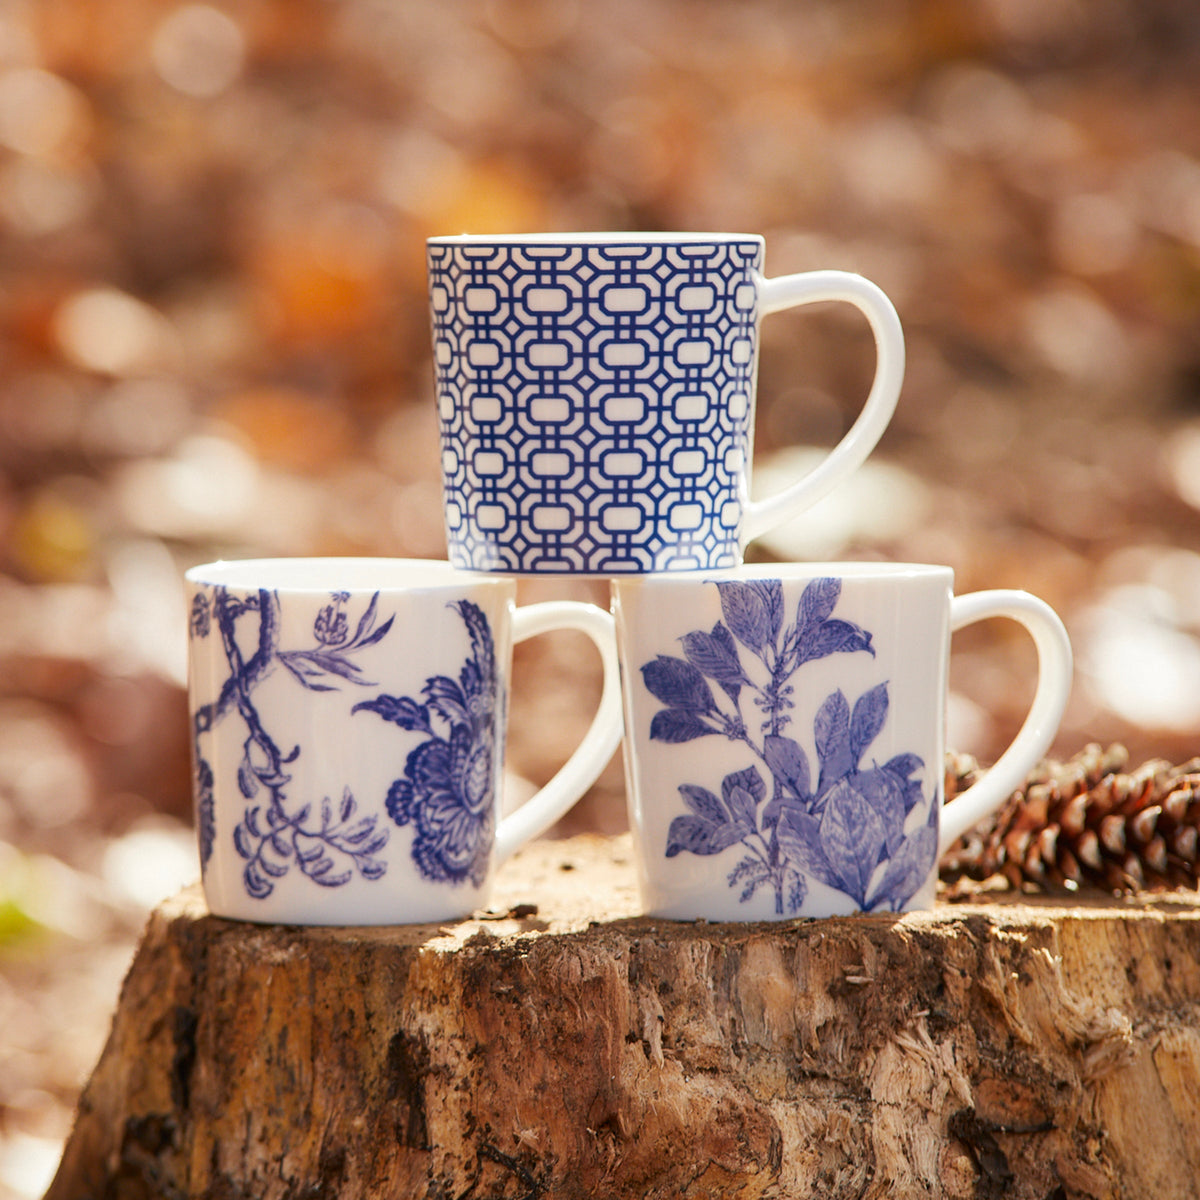 A stack of Caskata blue and white porcelain mugs in a wooded outdoor setting includes Arcadia, Arbor and Garden Gate patterns.